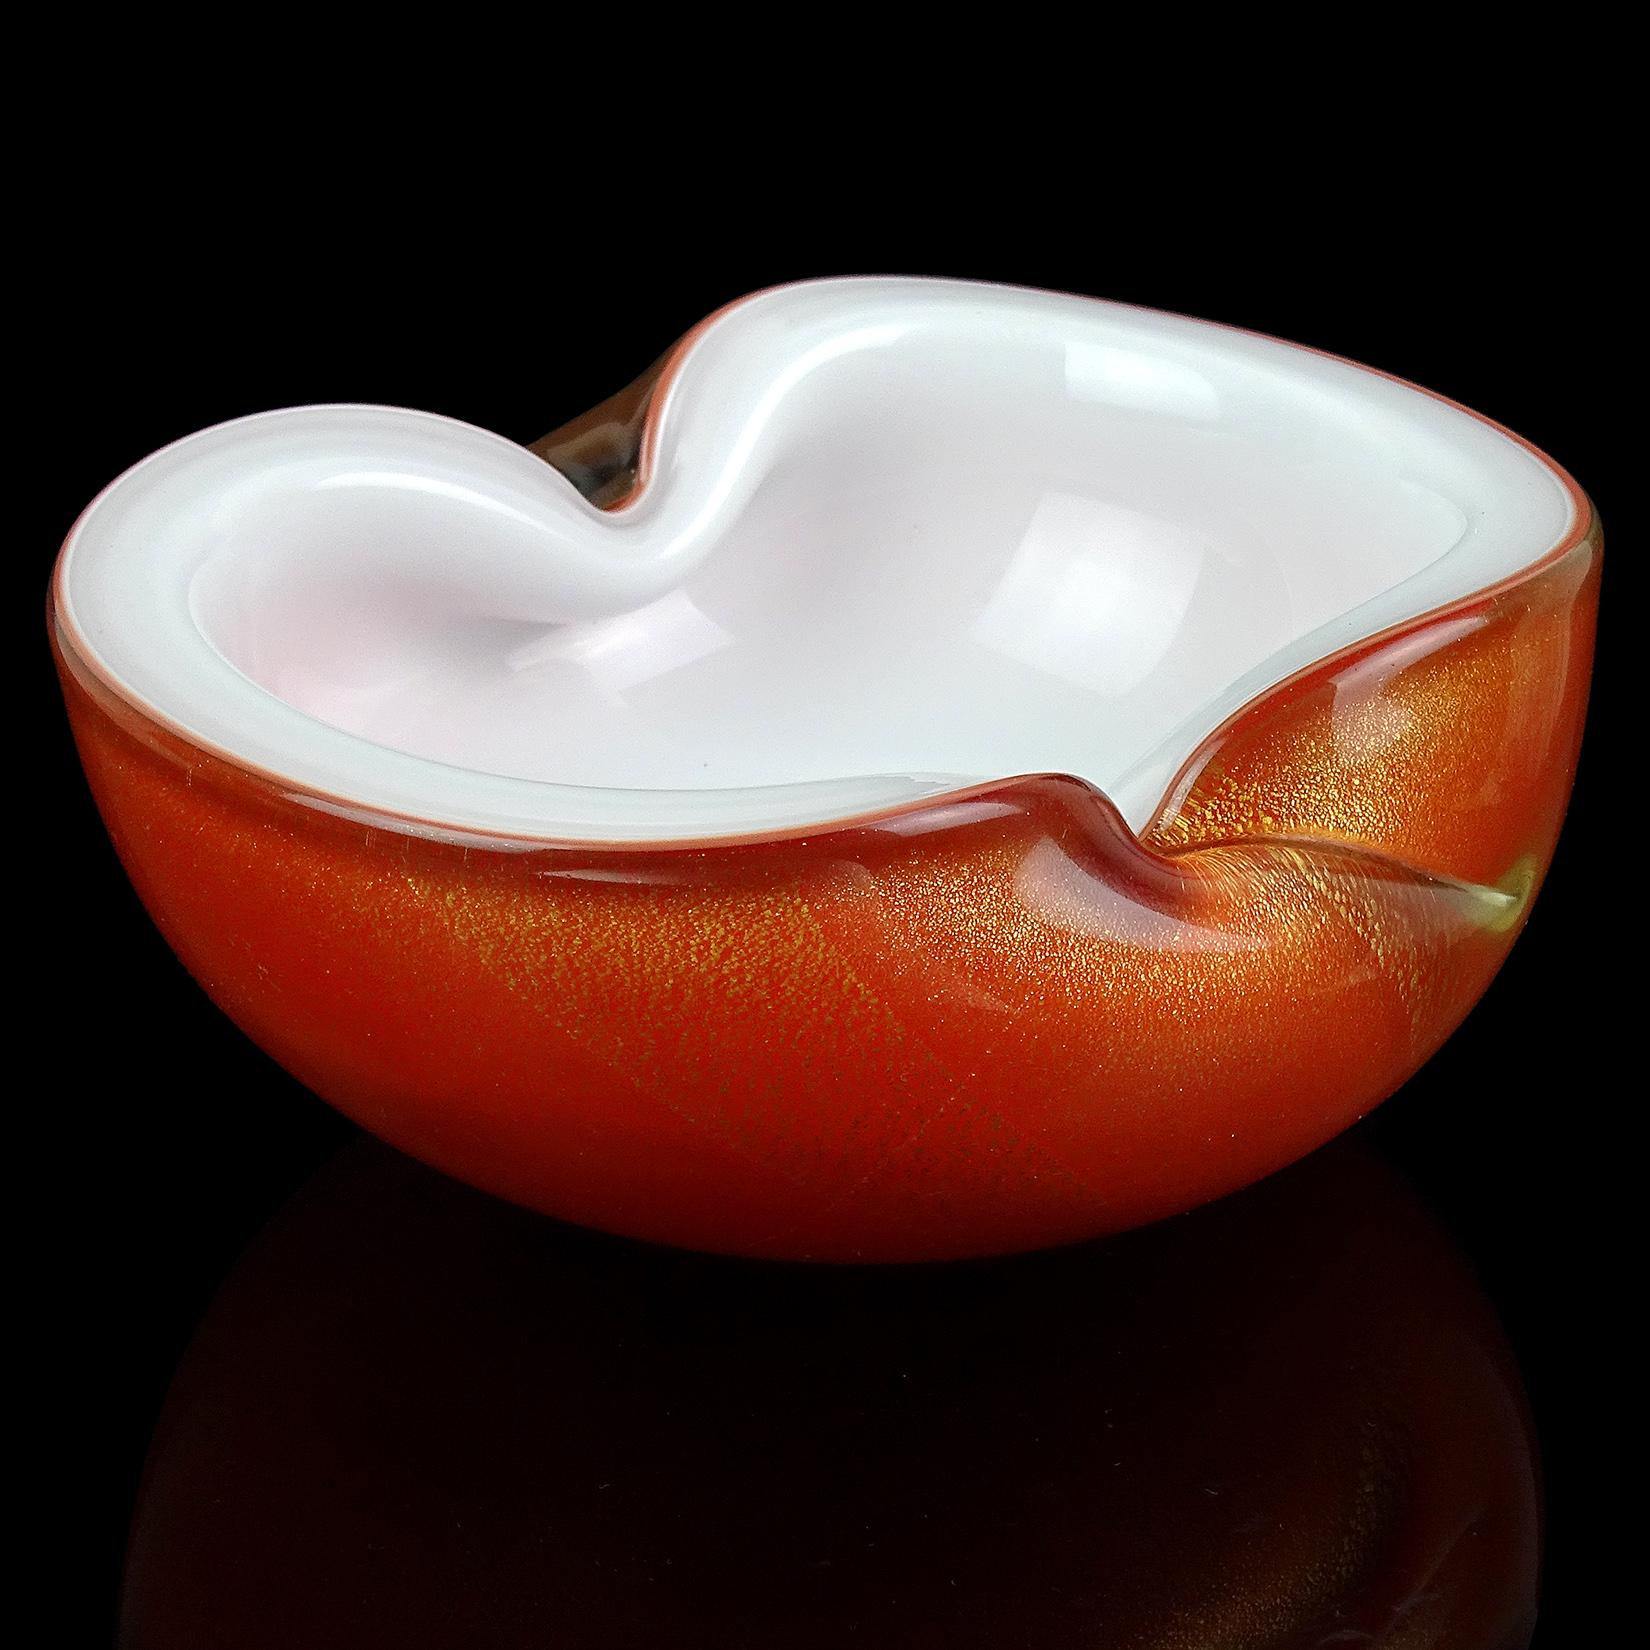 Beautiful vintage Murano hand blown orange over white, and gold flecks Italian art glass decorative bowl / ashtray. Documented to Master glass artist and designer Alfredo Barbini, circa 1950-1960. Published design. The color is a rich 